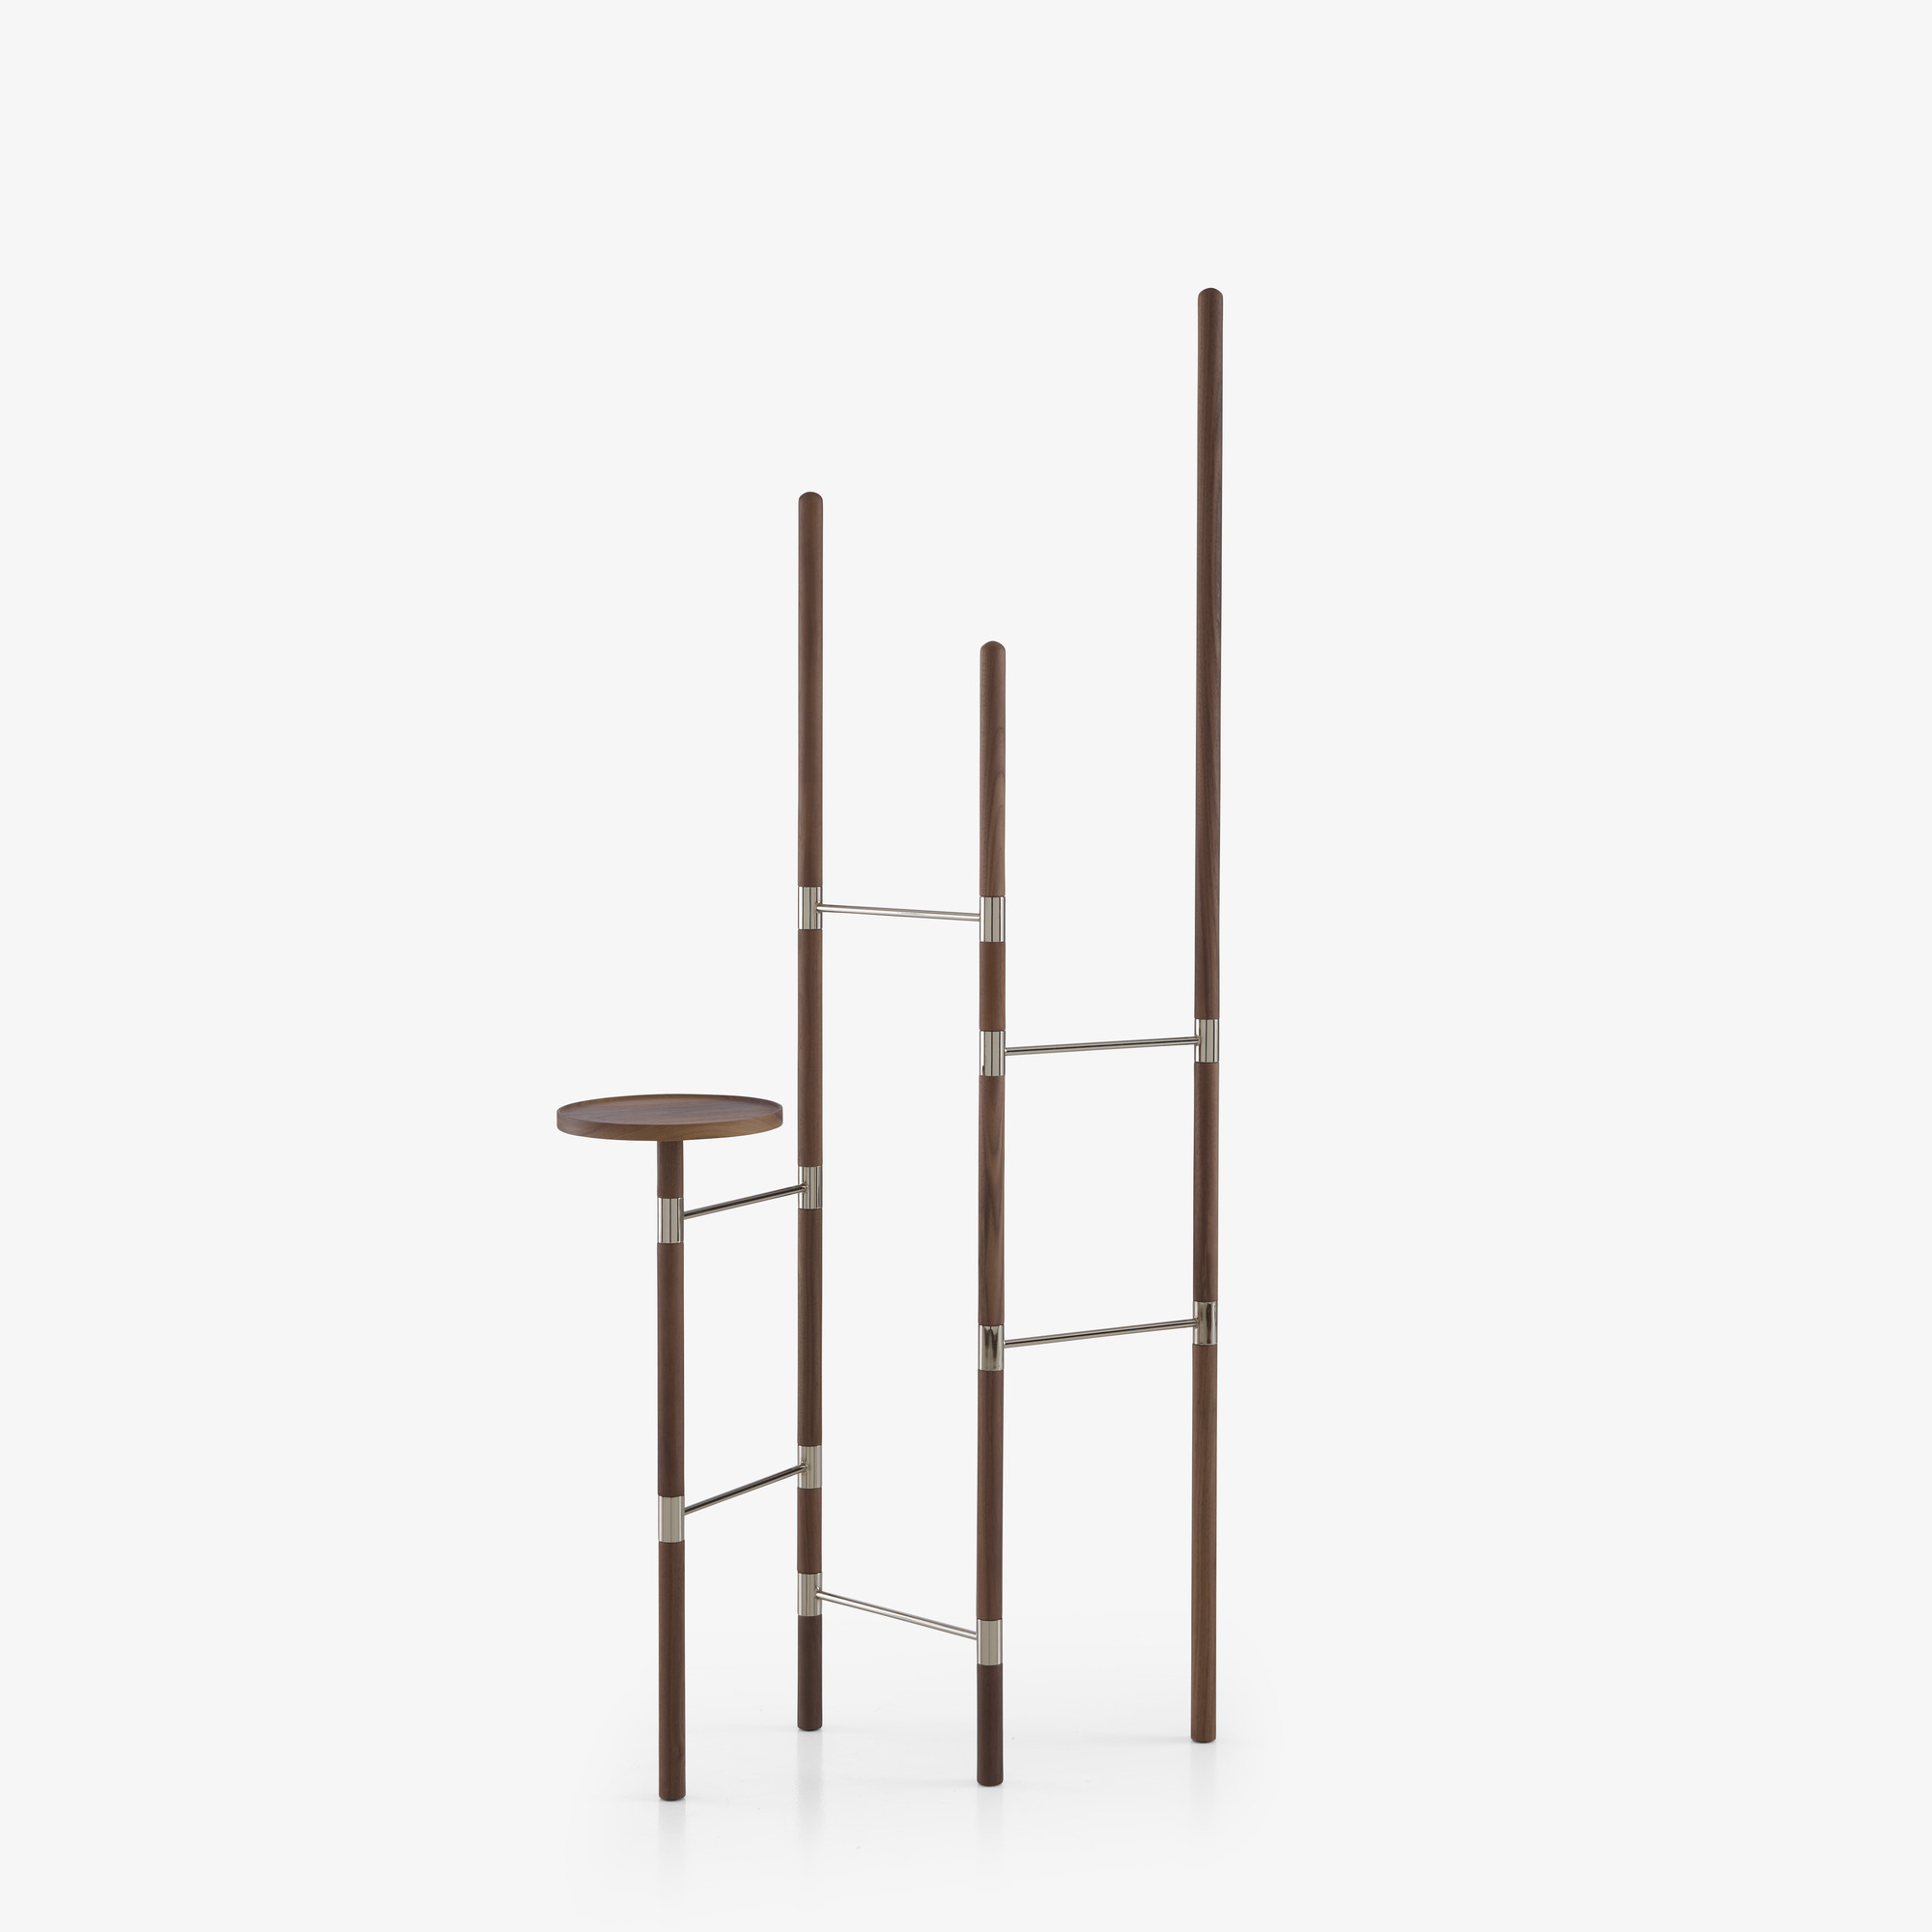 Image CLOTHES STAND WALNUT / NICKEL 